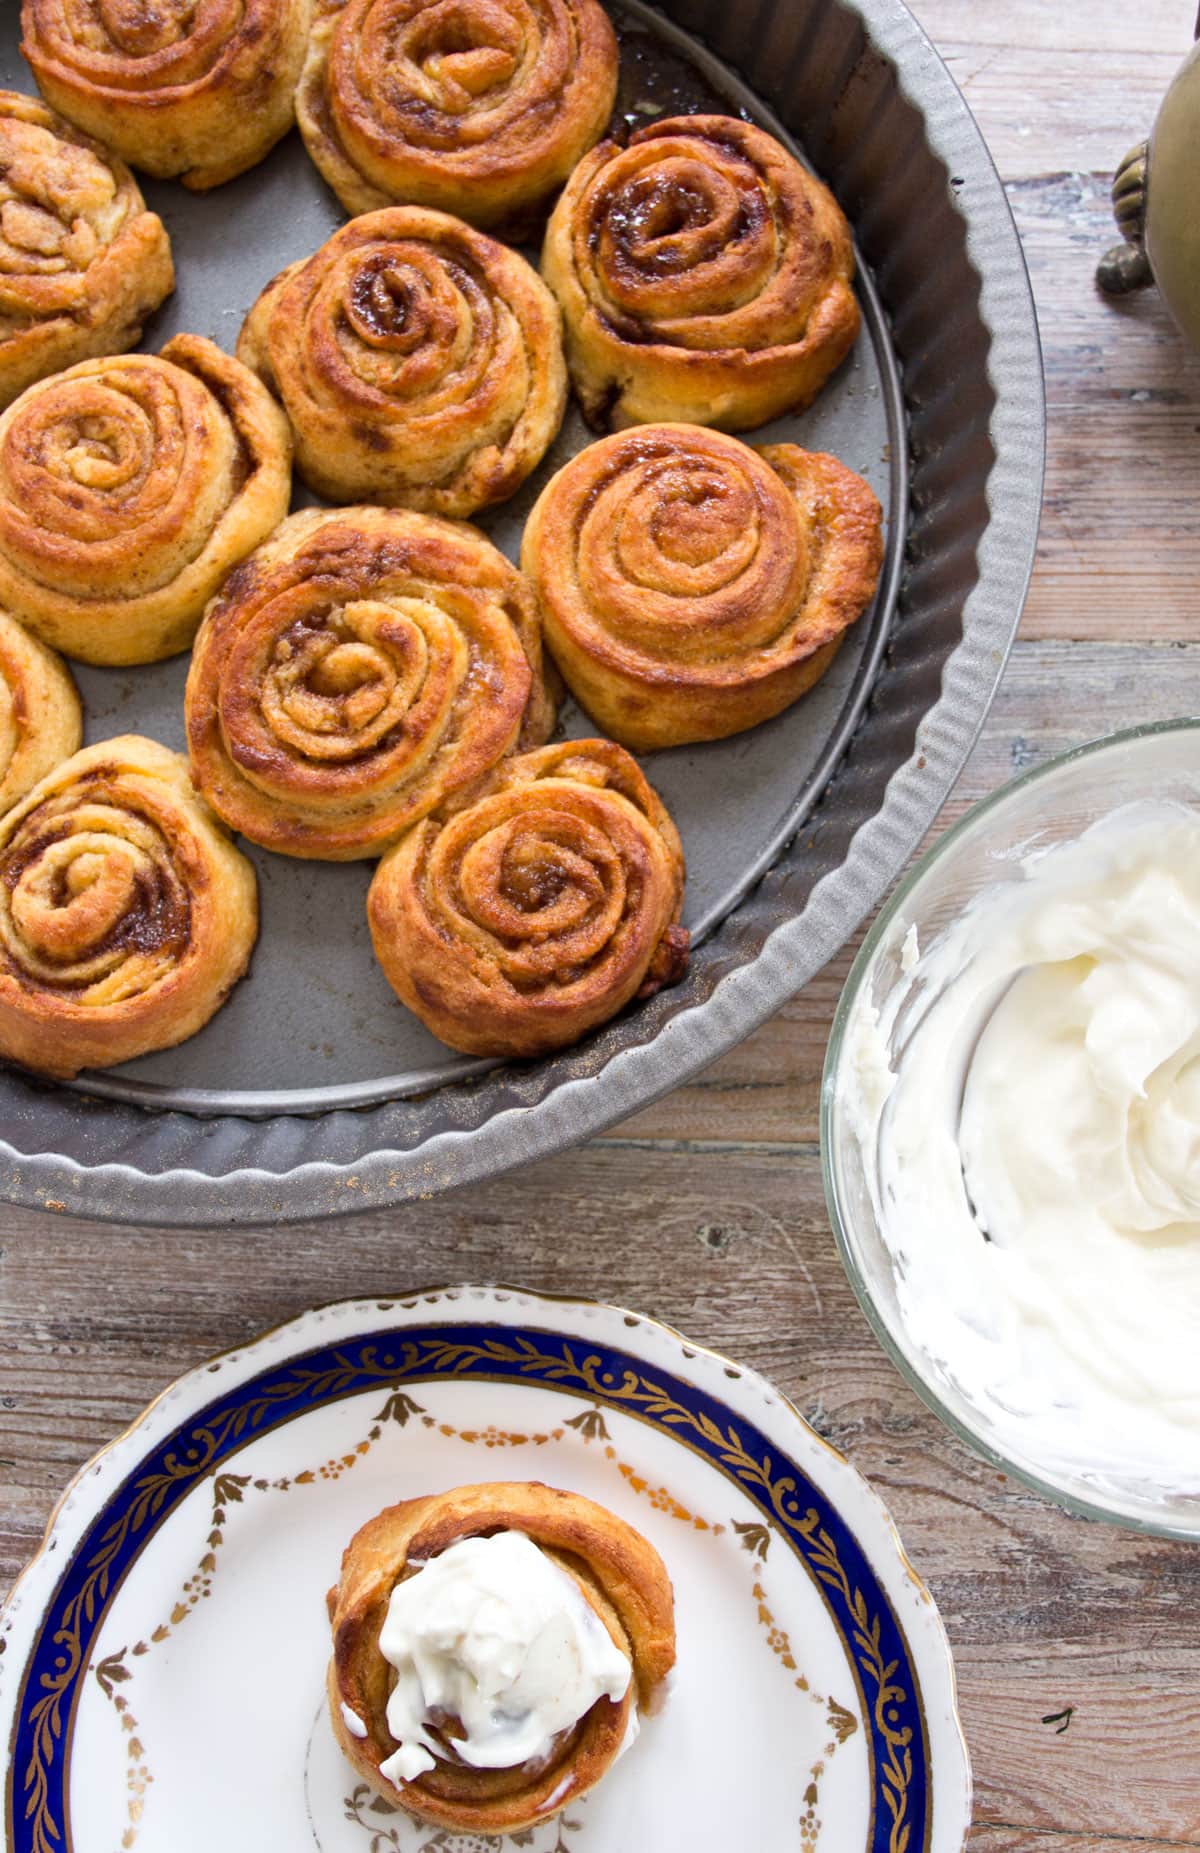 Cinnamon rolls and one roll with cream cheese frosting.